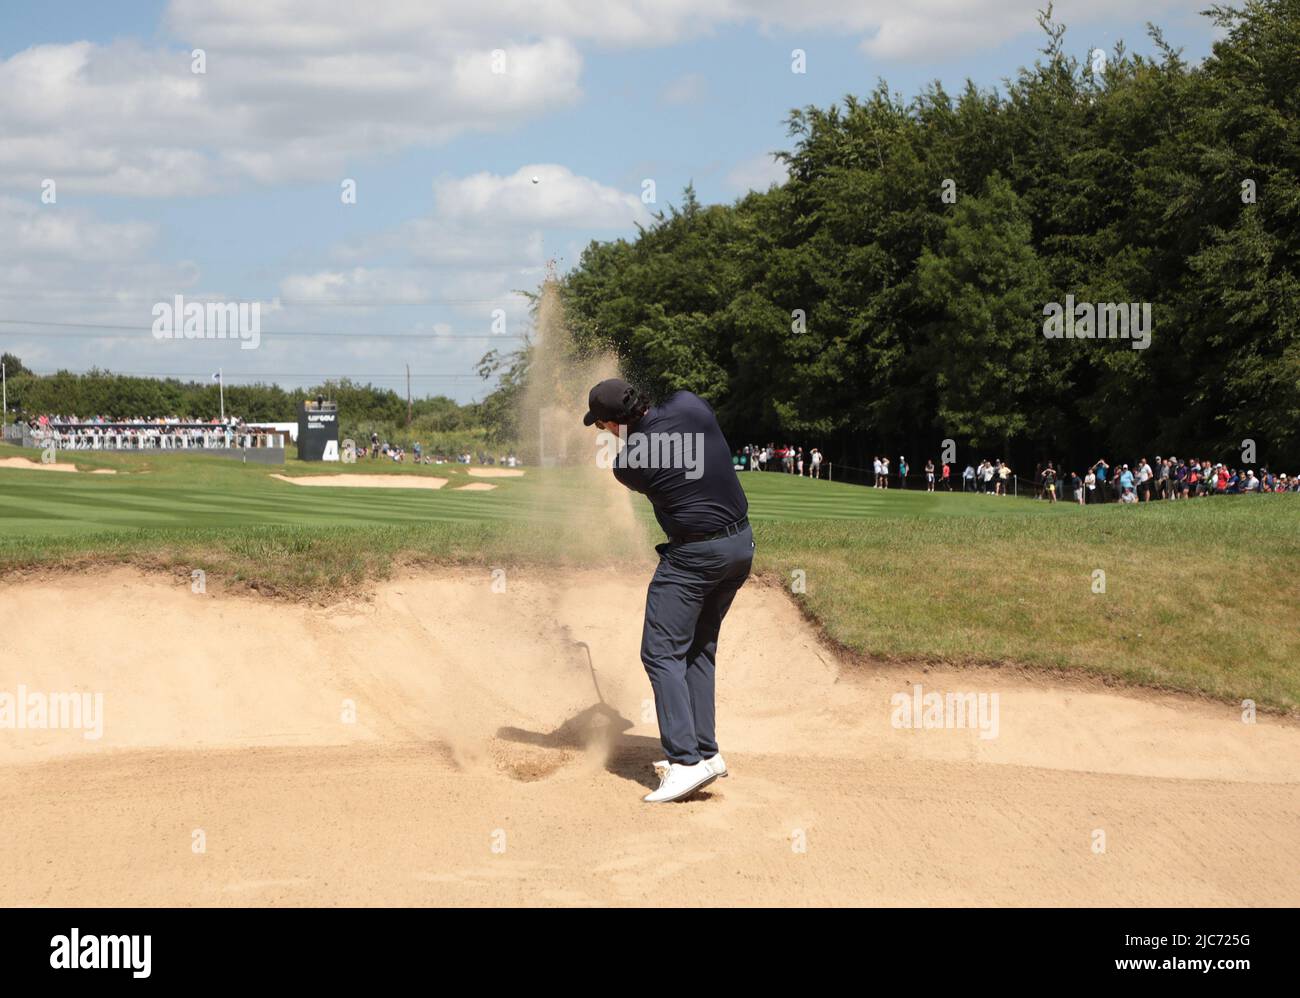 London, UK. 10th June, 2022. American Phil Mickelson hits out of the bunker during the second round of the inaugural LIV Golf event at the Centurion club in Hertfordshire on Friday, June 10, 2022.The event is 12 teams of four players competing over 54 holes for a prize pot of $25million dollars to the winning team. Photo by Hugo Philpott/UPI Credit: UPI/Alamy Live News Stock Photo